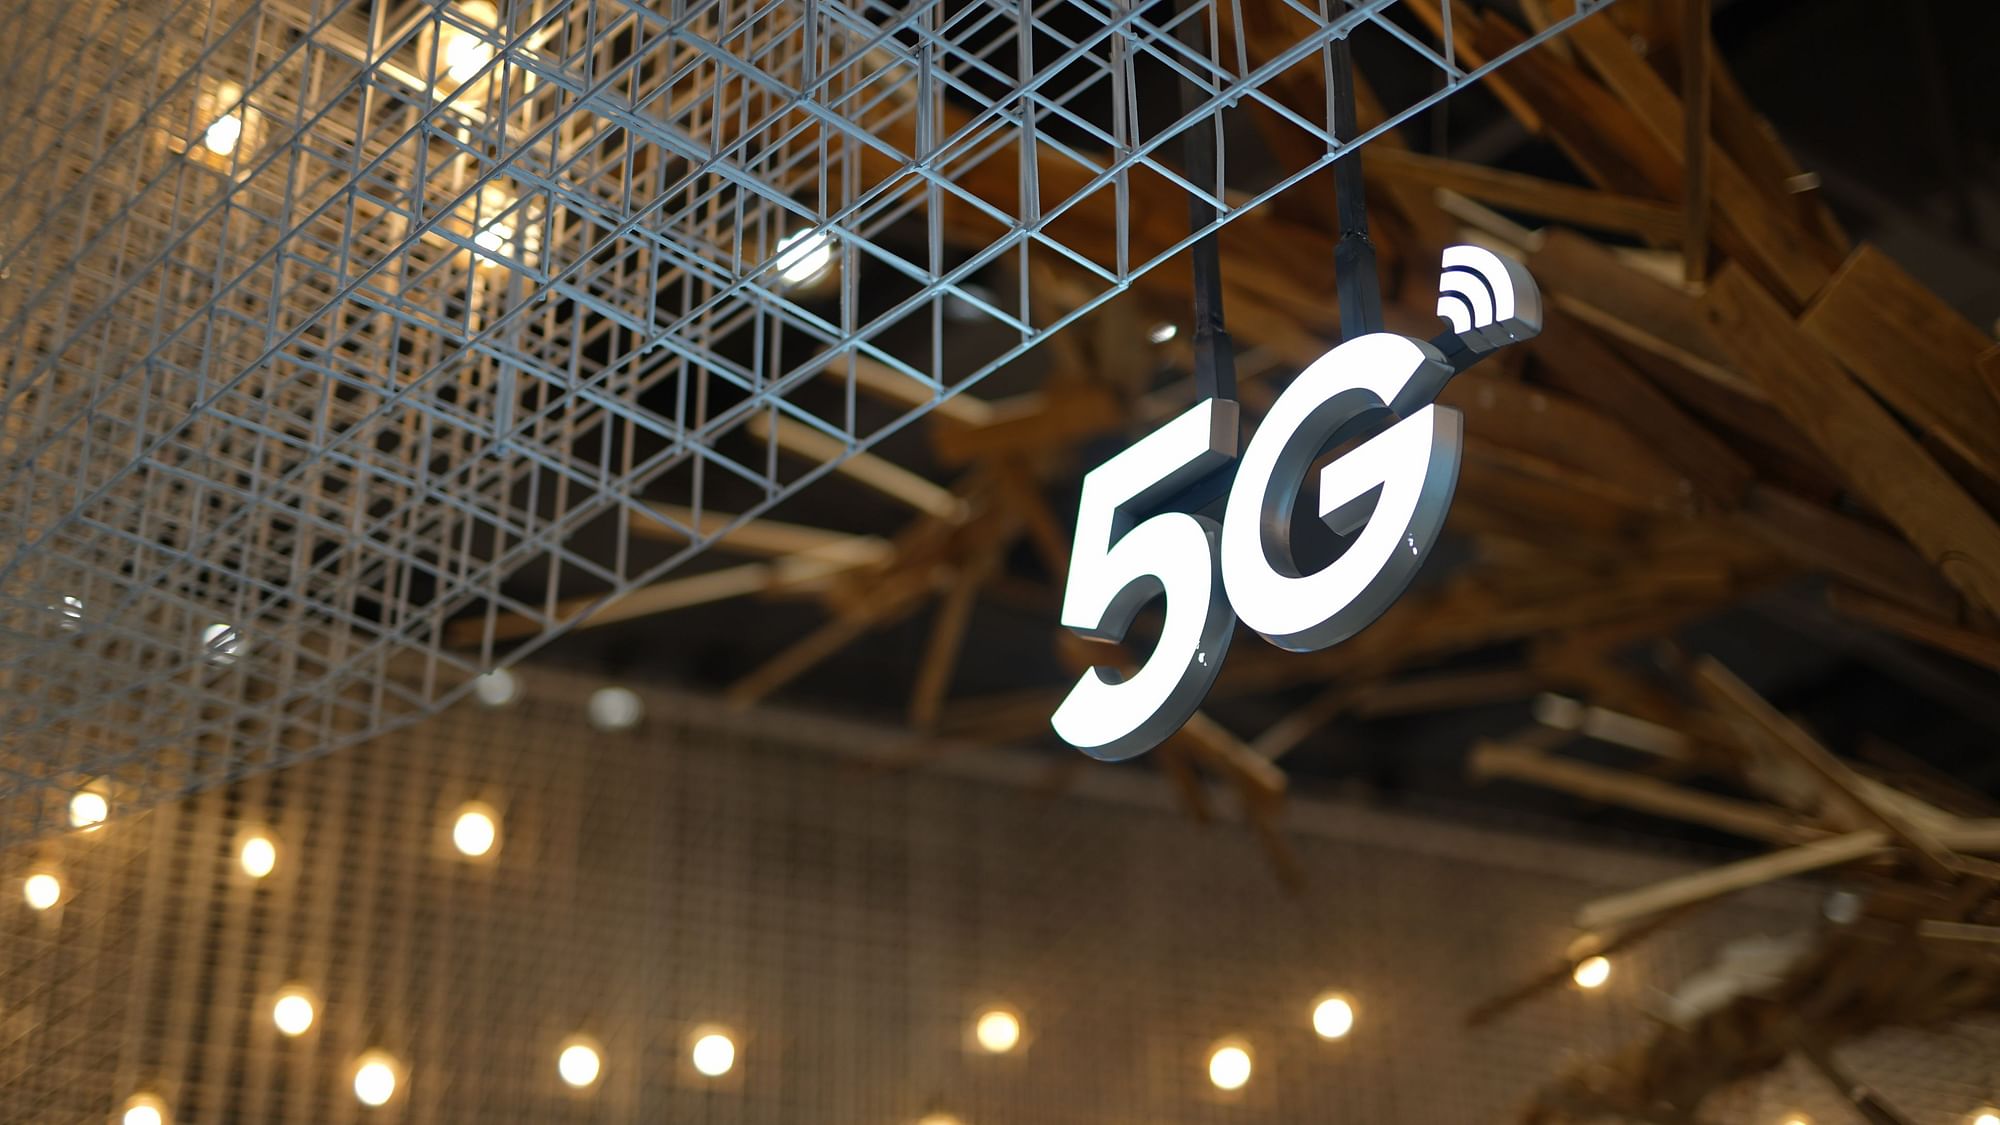 <div class="paragraphs"><p>The first day of the <a href="https://www.thequint.com/tech-and-auto/tech-news/union-cabinet-approves-5g-mega-auction-all-you-need-to-know">5G auction</a> on Tuesday saw the government receive bids of Rs 1.45 lakh crore from the four contenders, Communications Minister Ashwini Vaishnaw said.</p></div>